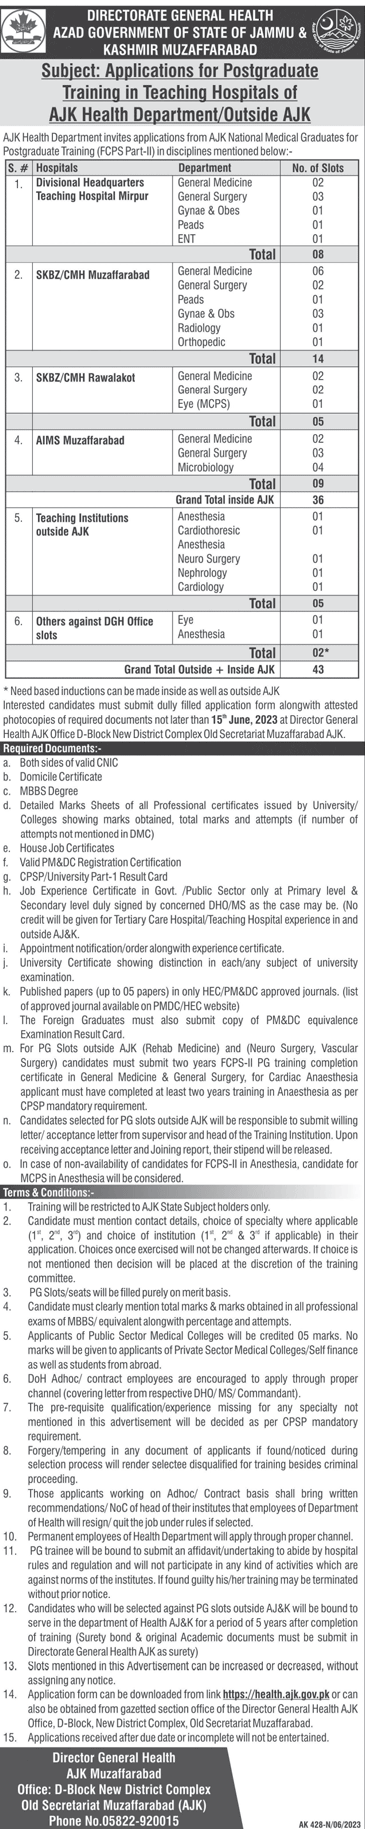 Applications for Postgraduate Trainings in teaching Hospitals AJK / Health Departments